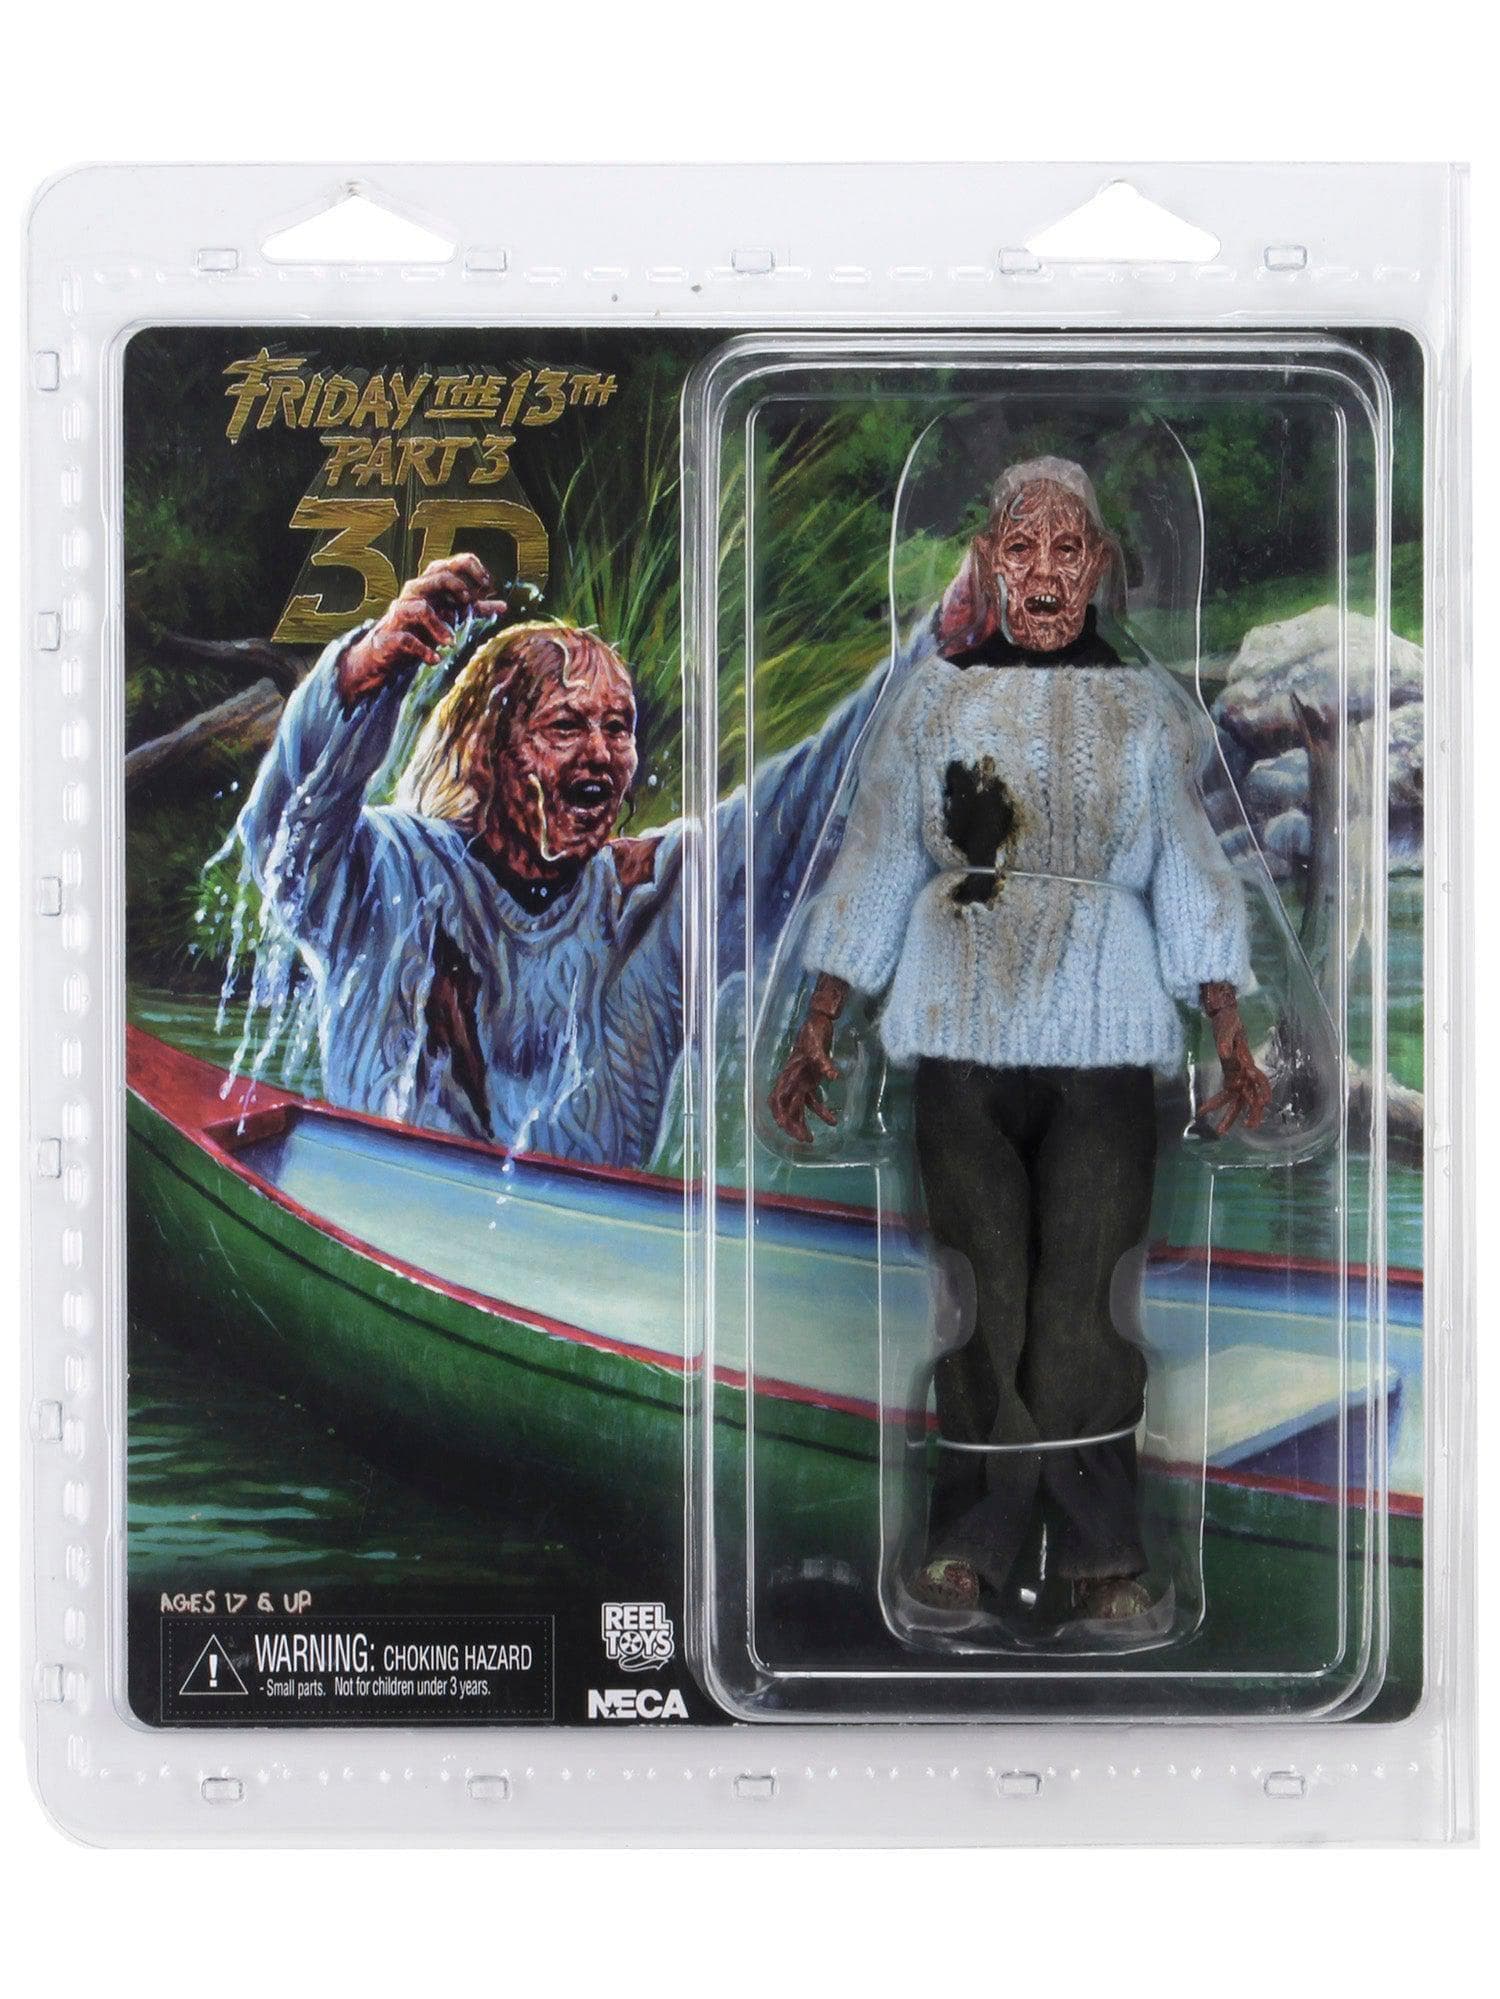 Friday the 13th - 8" Clothed Figure - Corpse Pamela - costumes.com